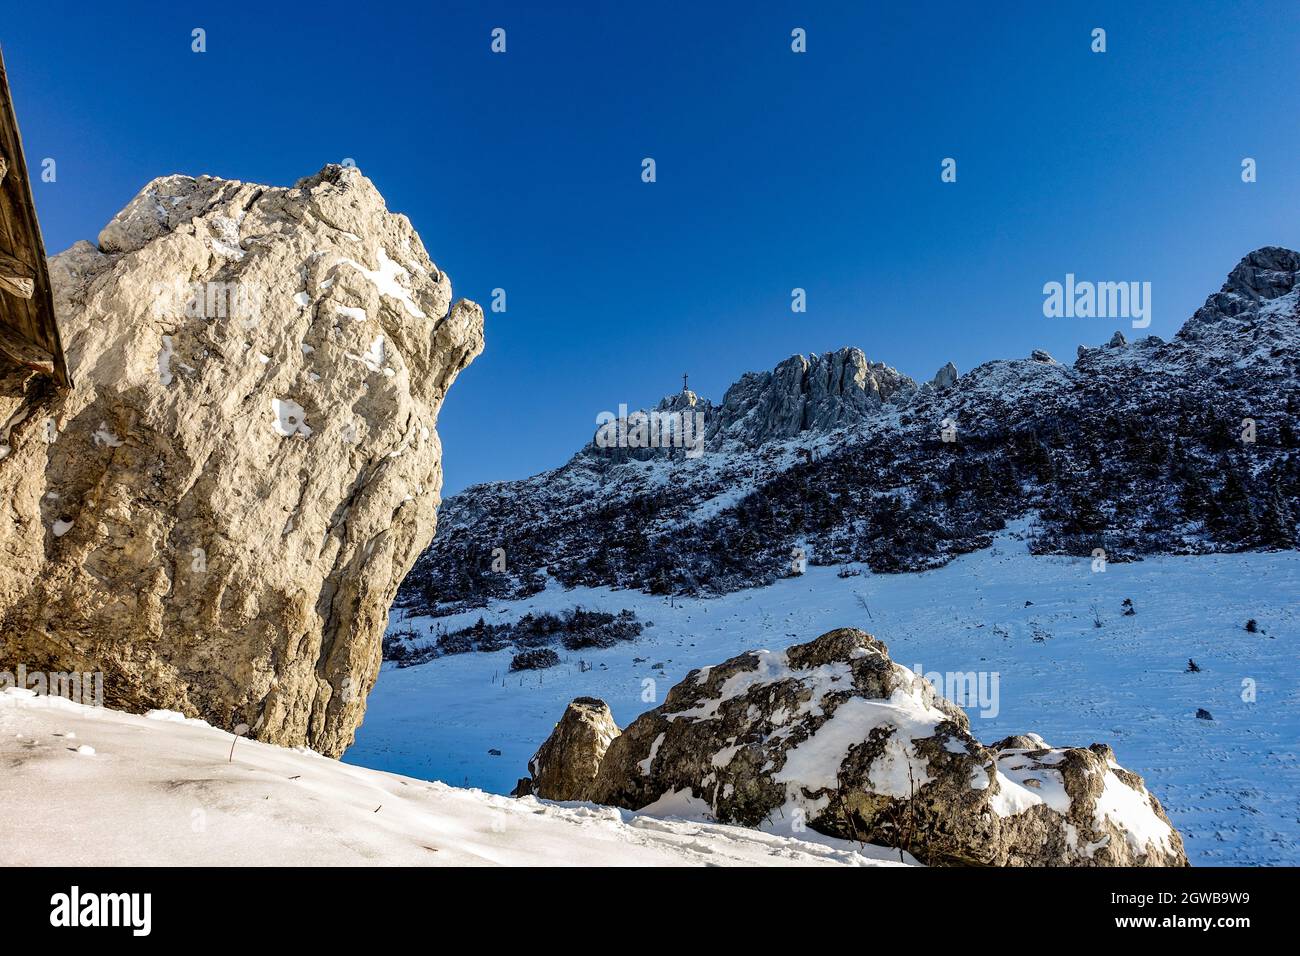 Scenic View Of Snowcapped Mountains Against Clear Blue Sky Stock Photo